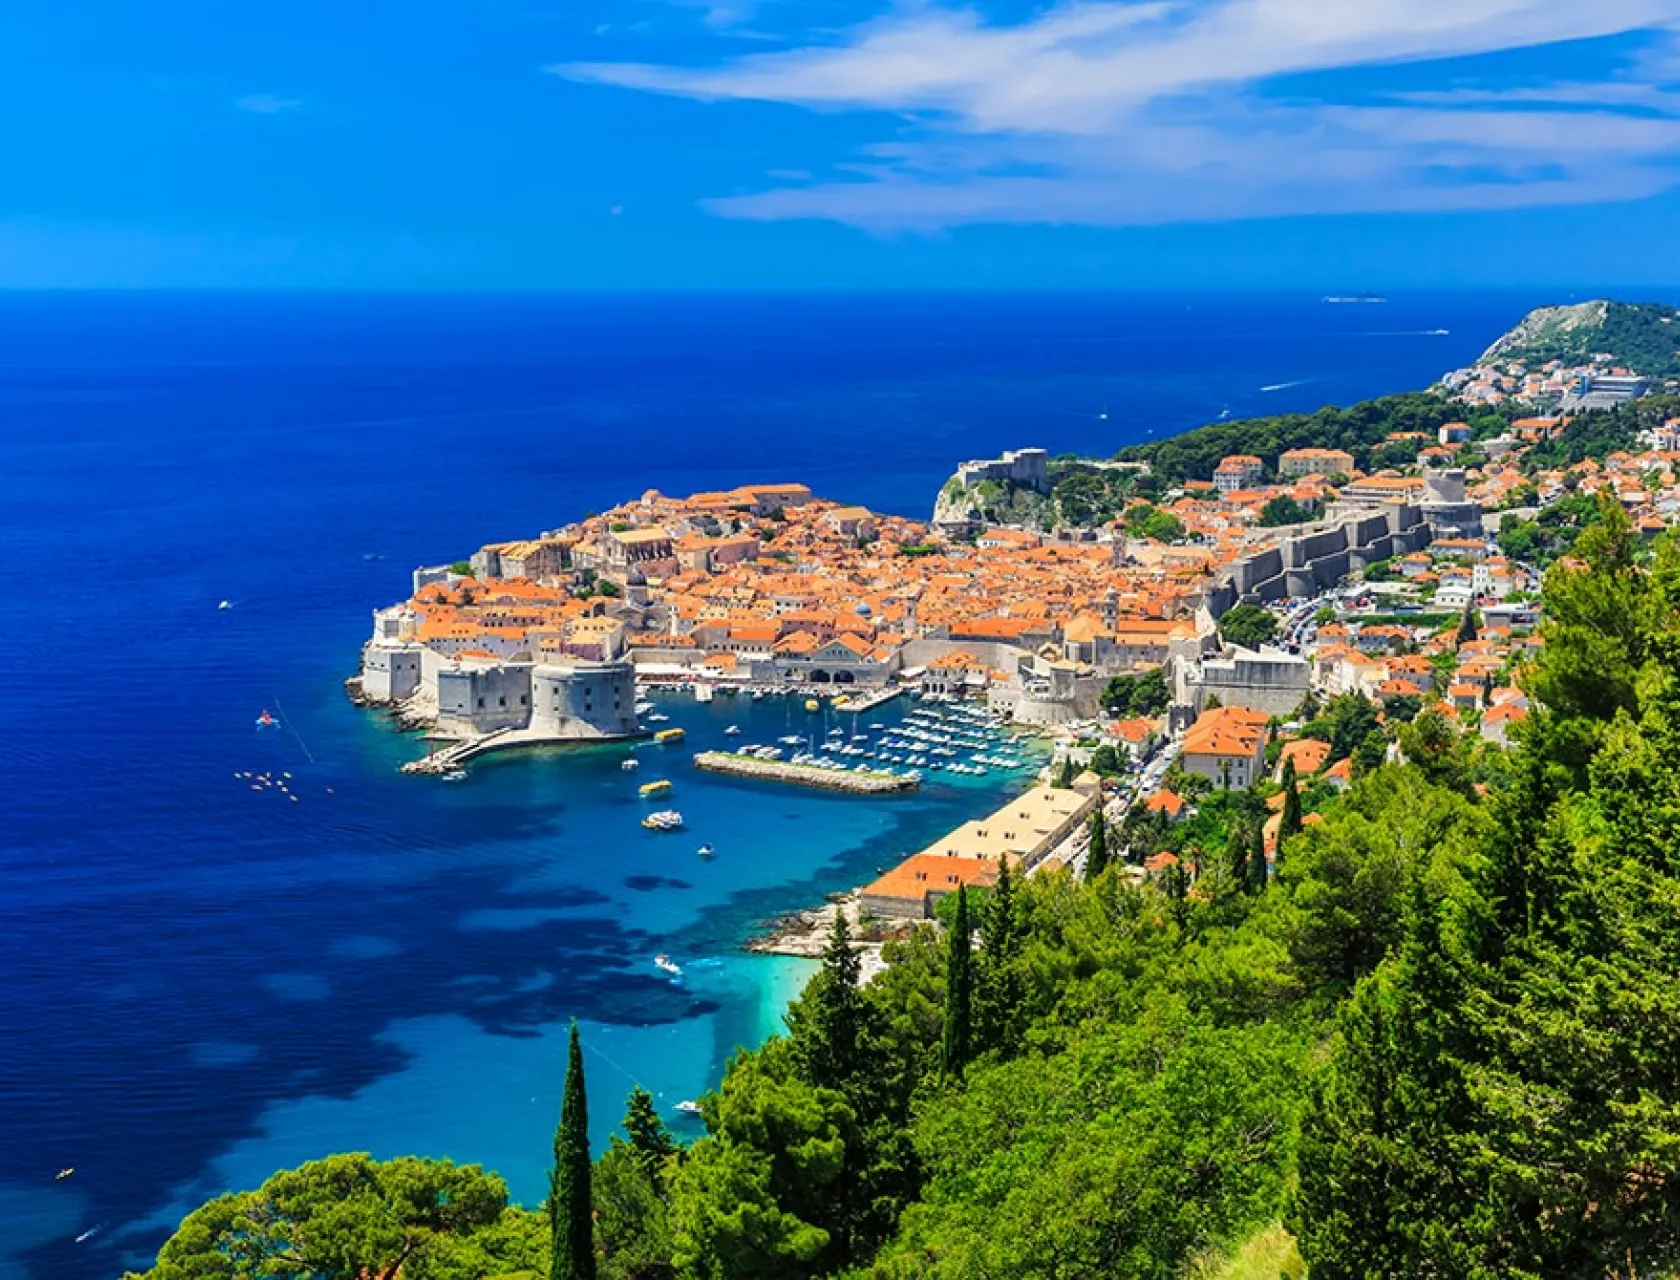 A-panoramic-view-of-the-walled-city-Dubrovnik-Croatia